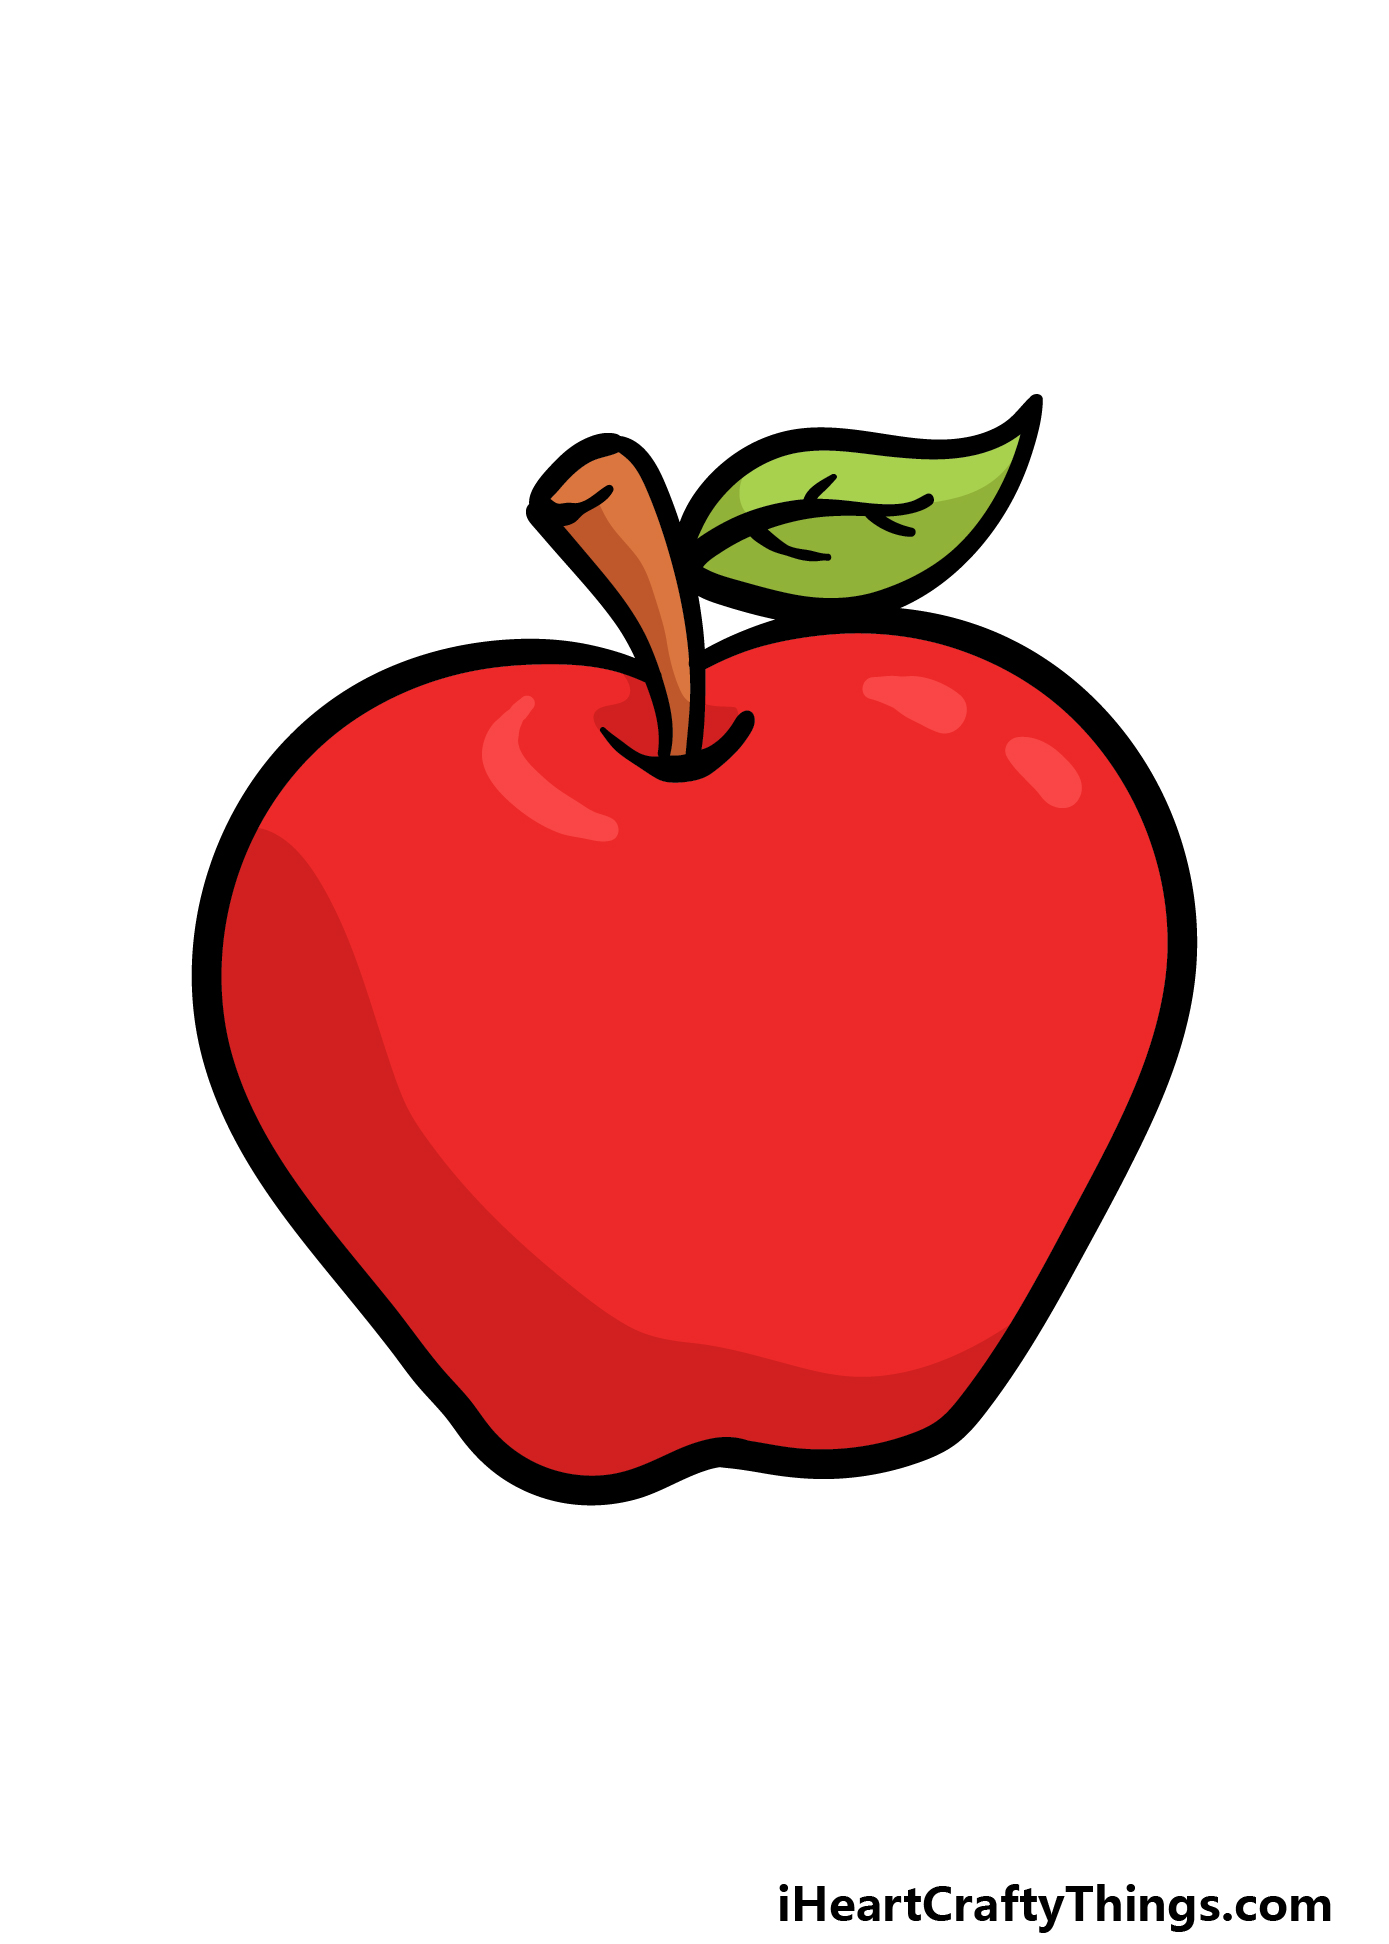 Apple coloring book vector illustration. Apple coloring book hand drawn  vector illustration. | CanStock